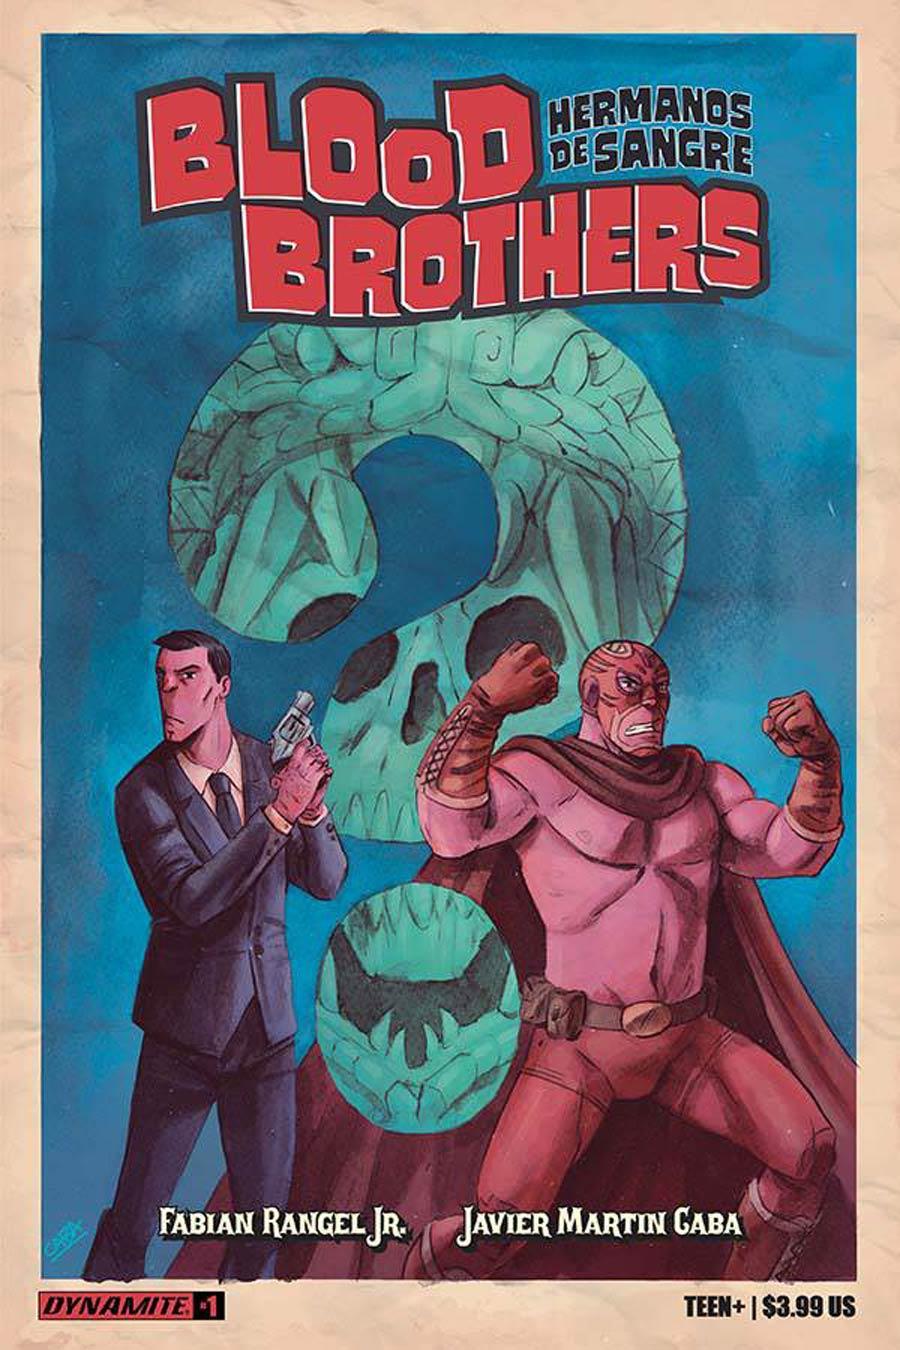 Blood Brothers (Dynamite Entertainment) Vol. 1 #1